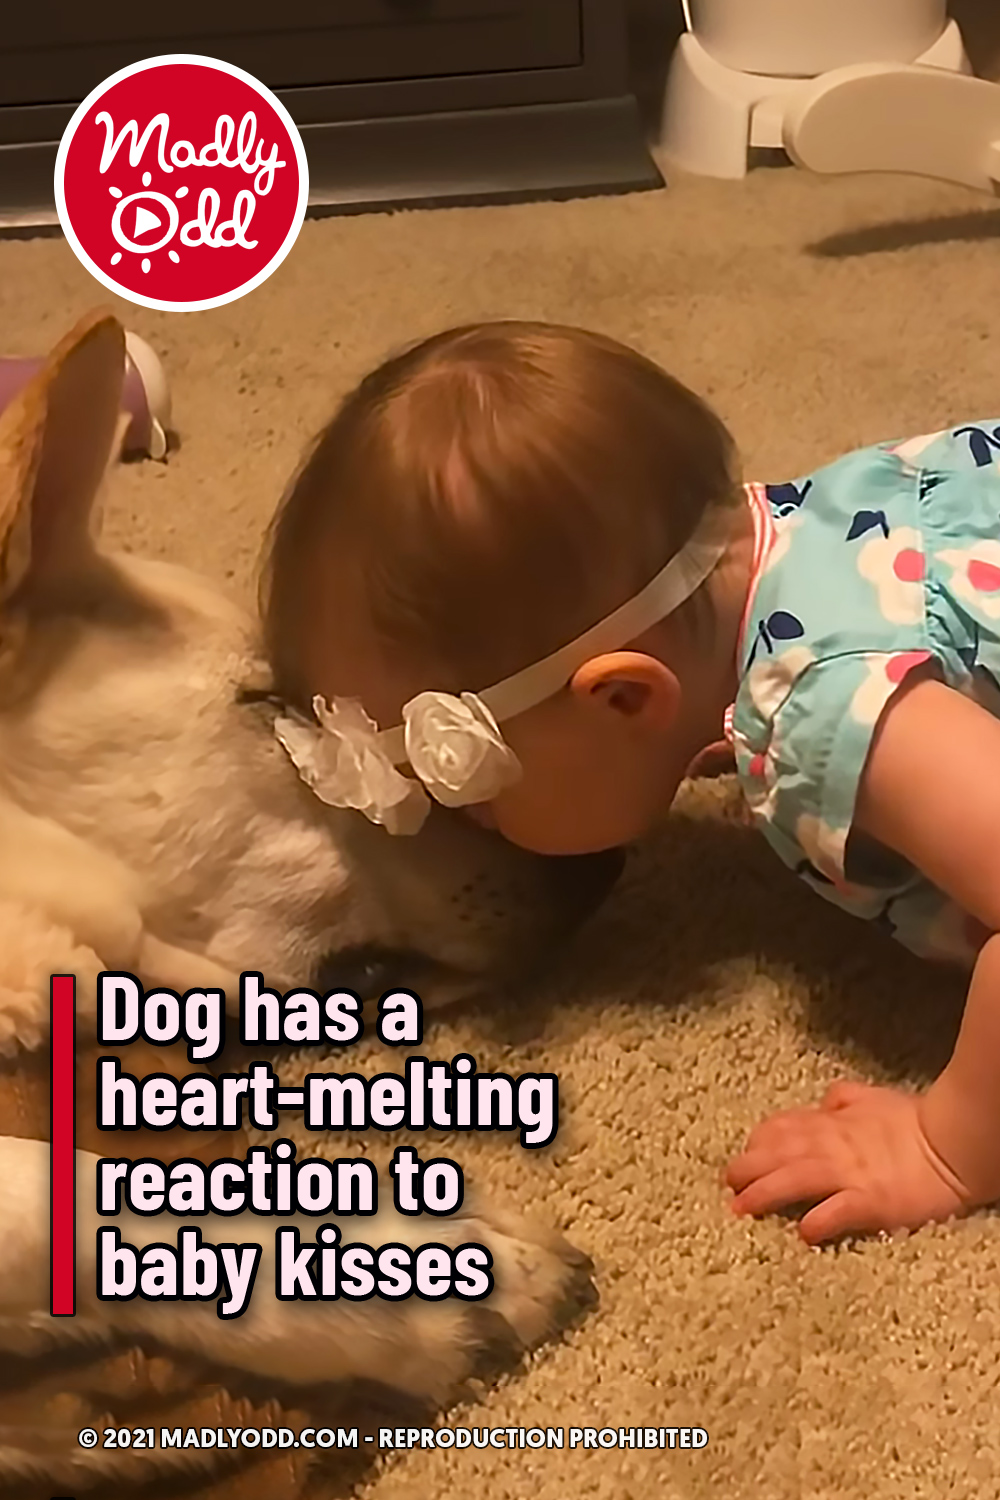 Dog has a heart-melting reaction to baby kisses